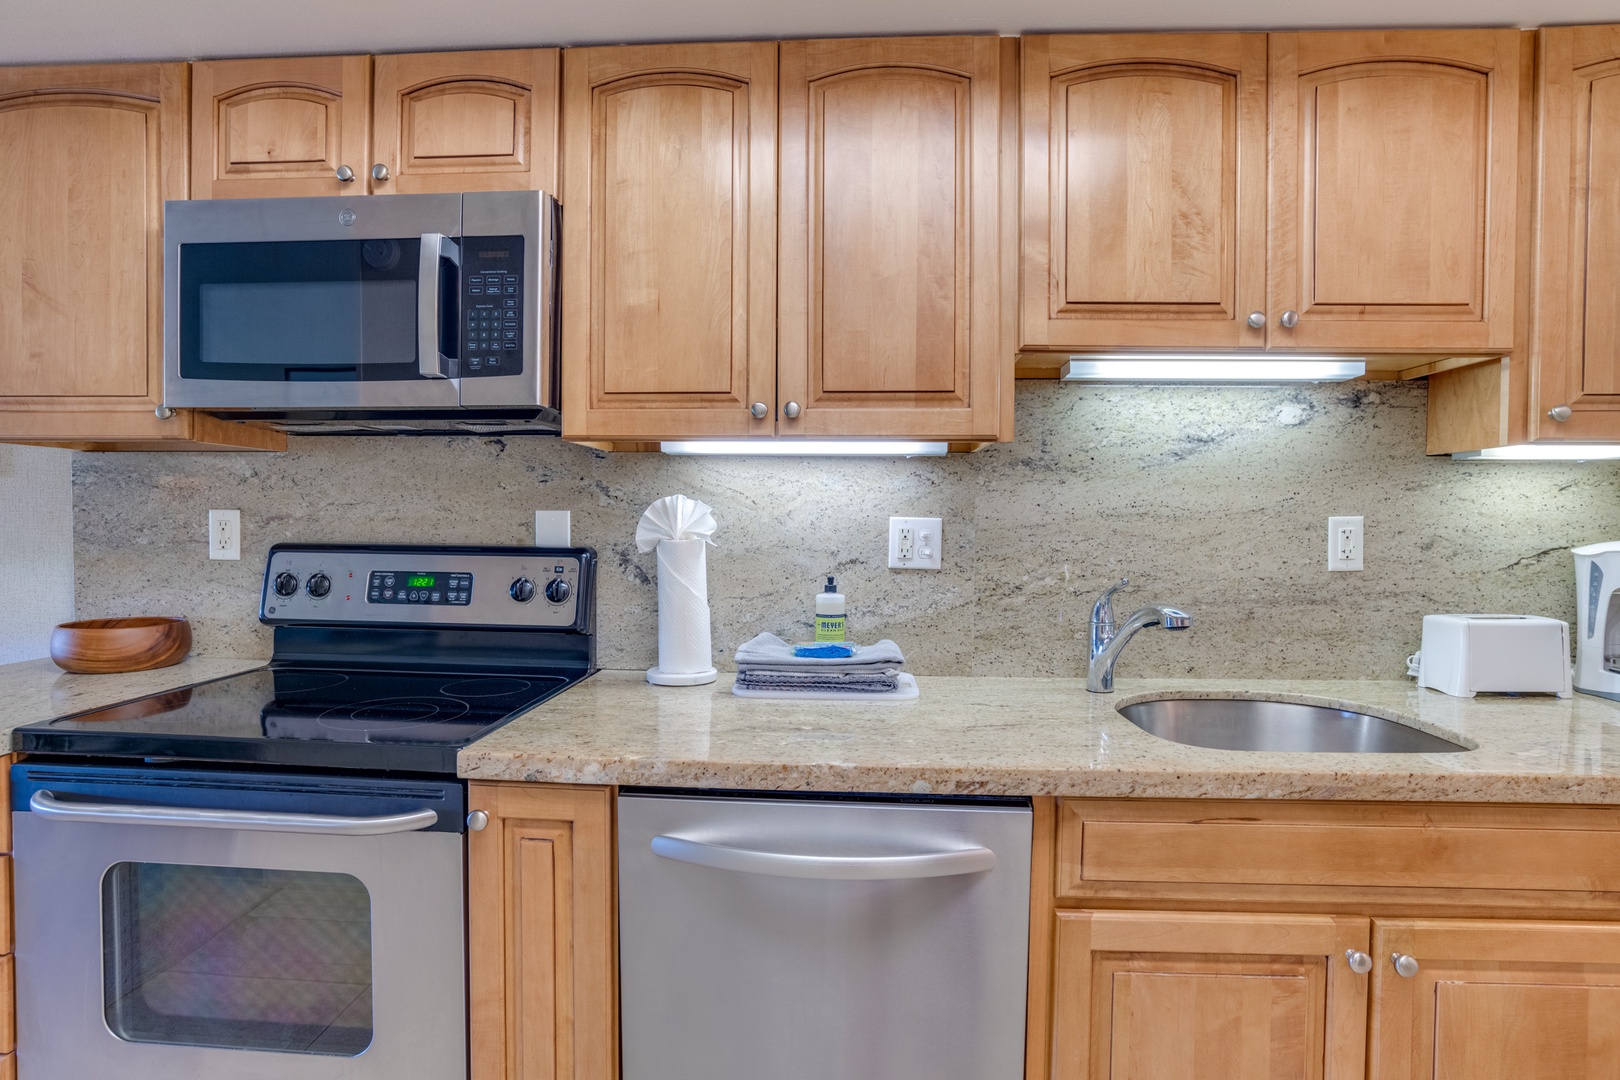 Lahaina Vacation Rentals, Maui Kaanapali Villas B225 - Plenty of countertop space to cook or not cook!